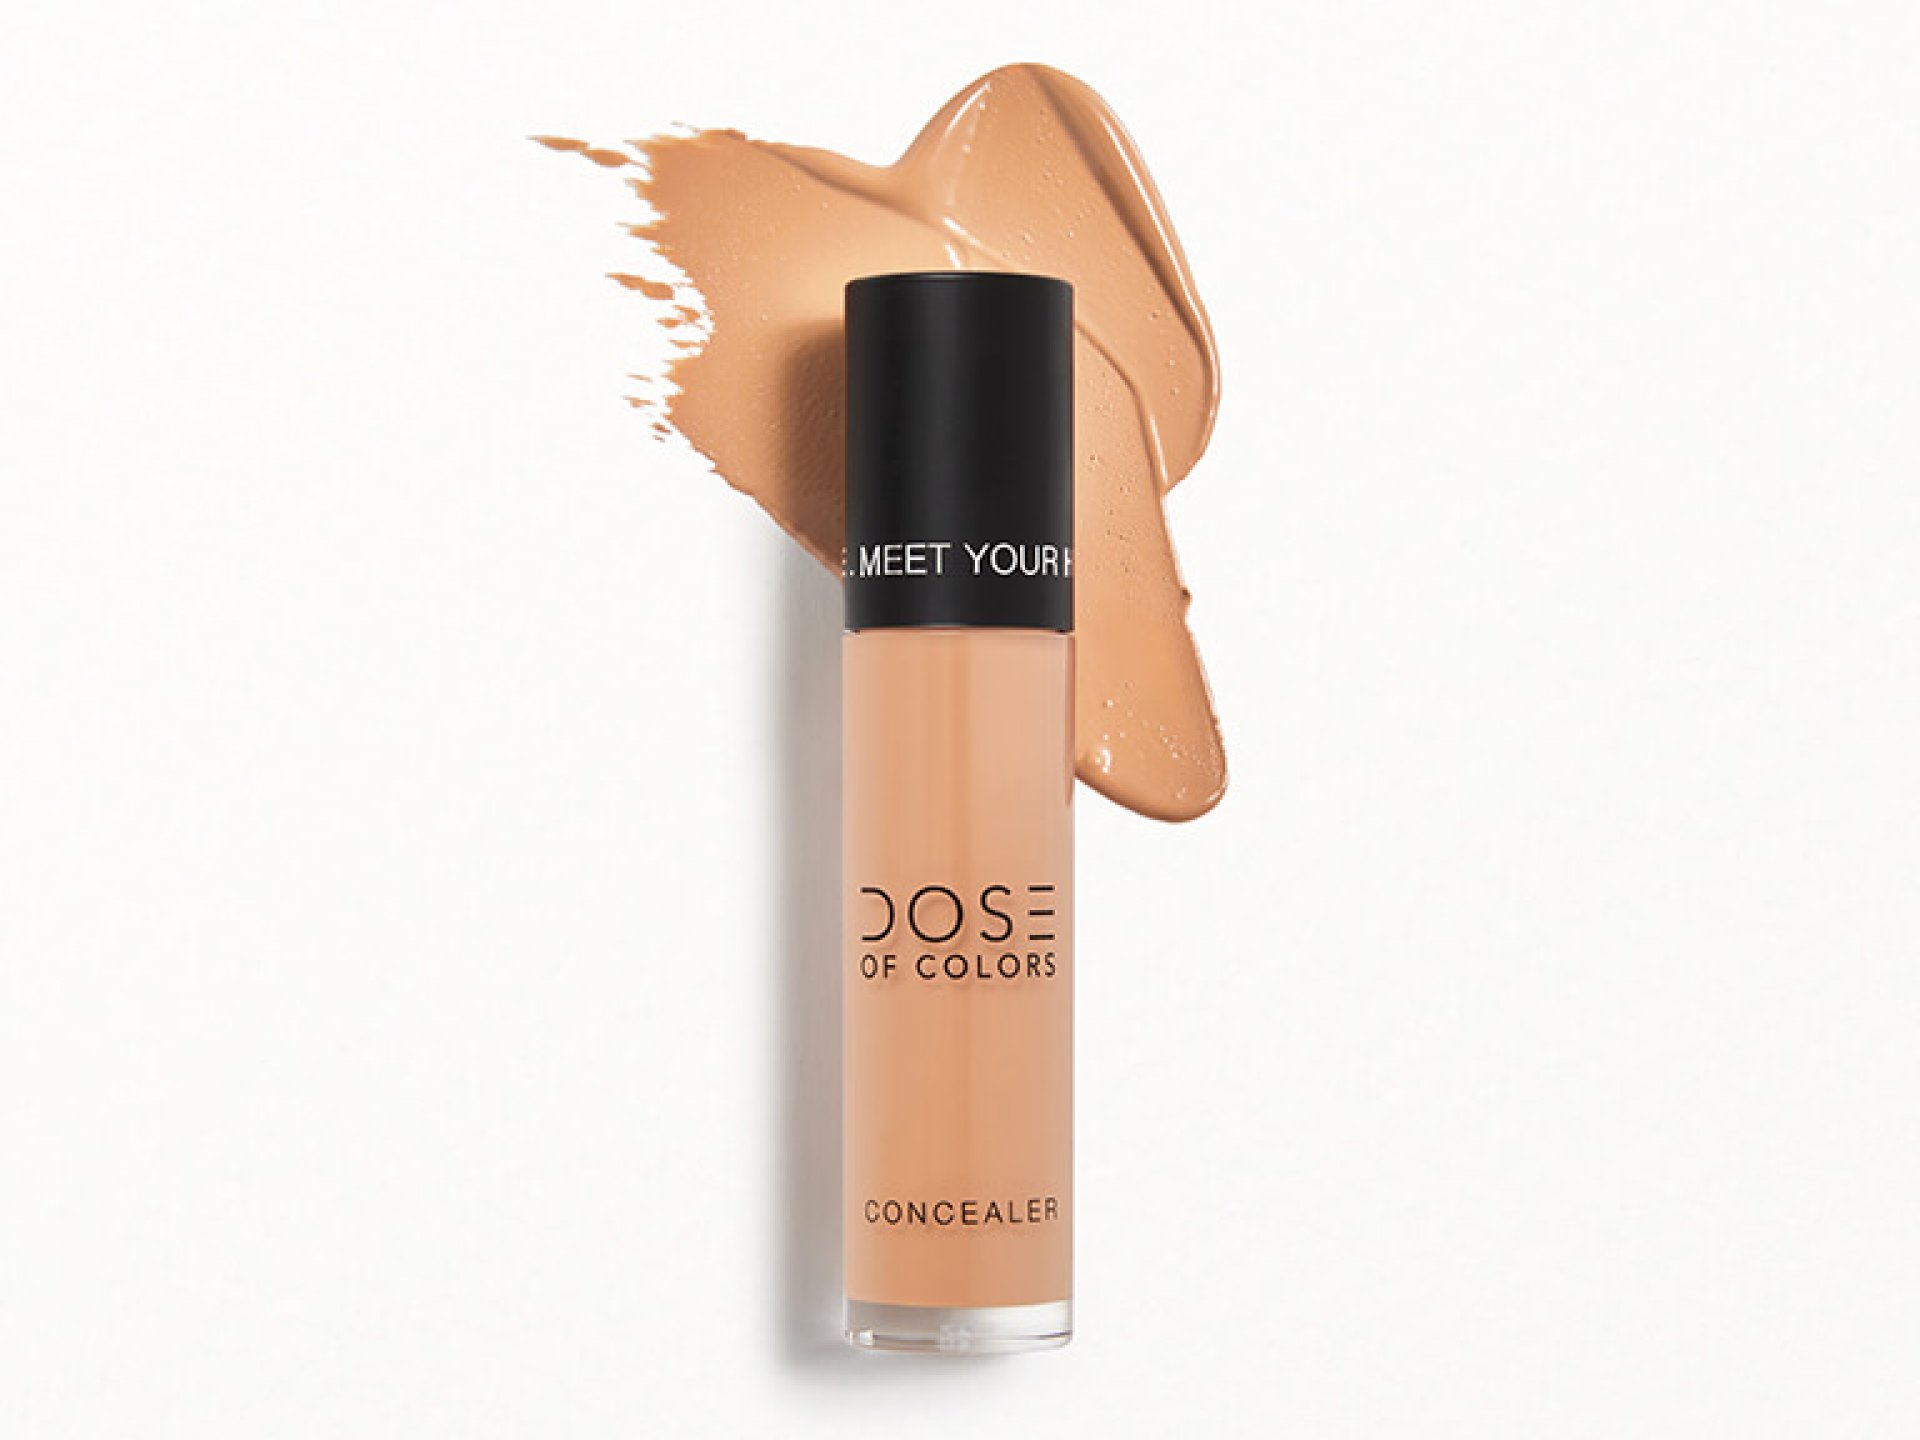 DOSE OF COLORS Meet Your Hue Concealer in 12 - Light Medium